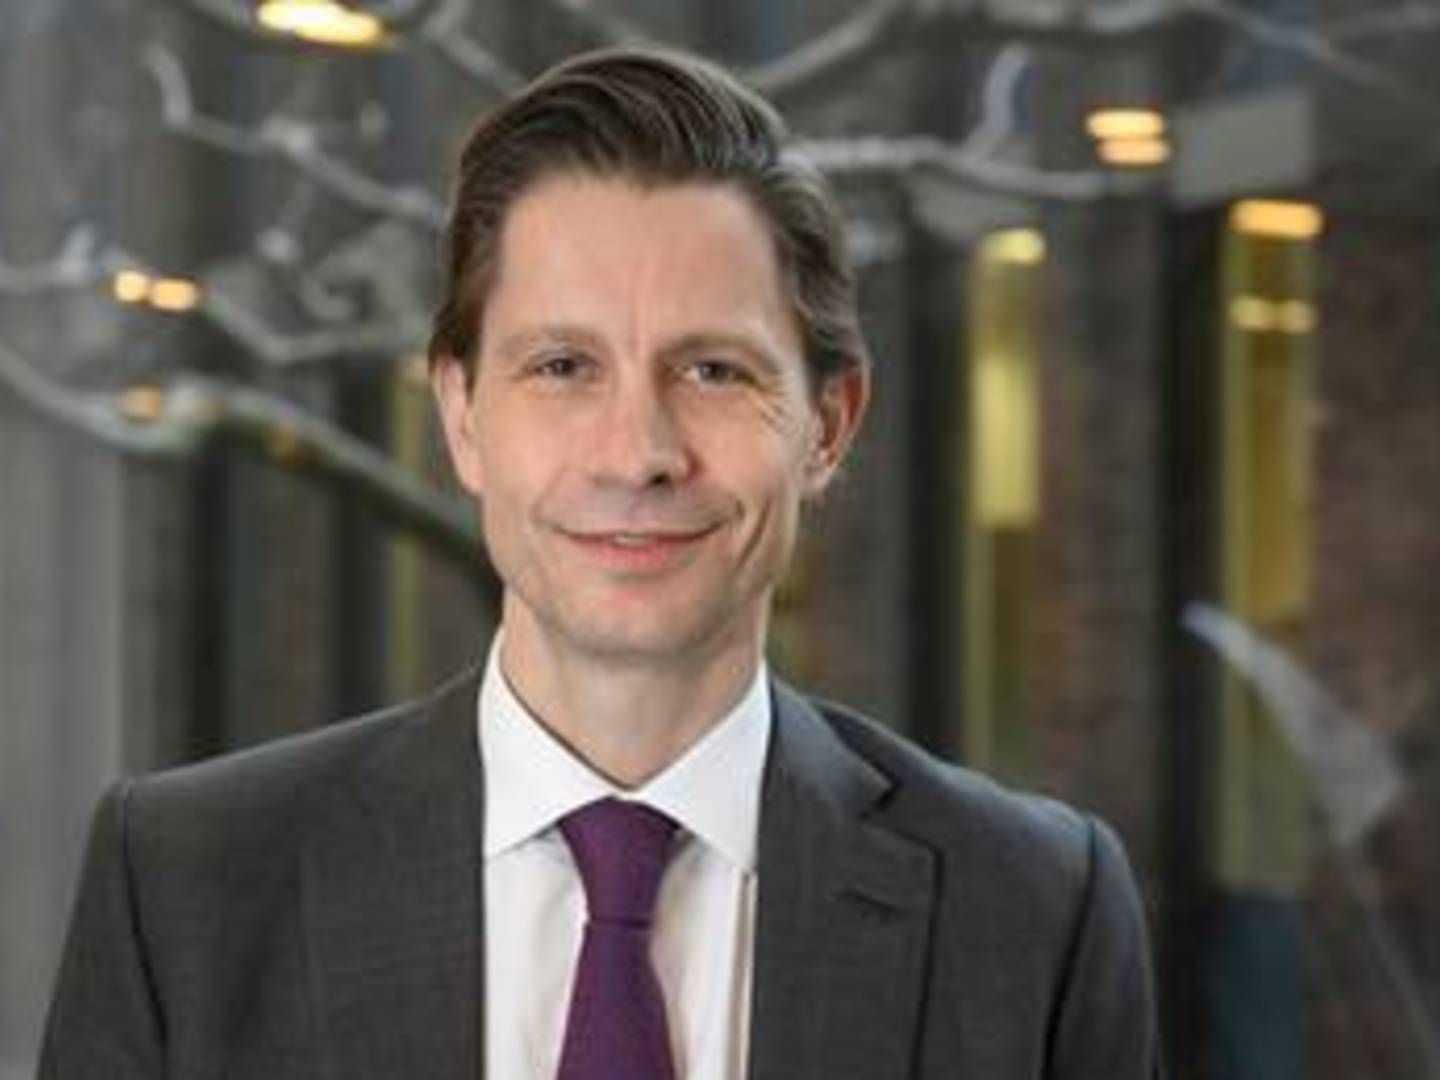 Christian Heiberg participates in two of this year's top ten most-read articles. In late January 2021, he will become Head of Danske Bank Asset Management. | Photo: Danske Bank/PR